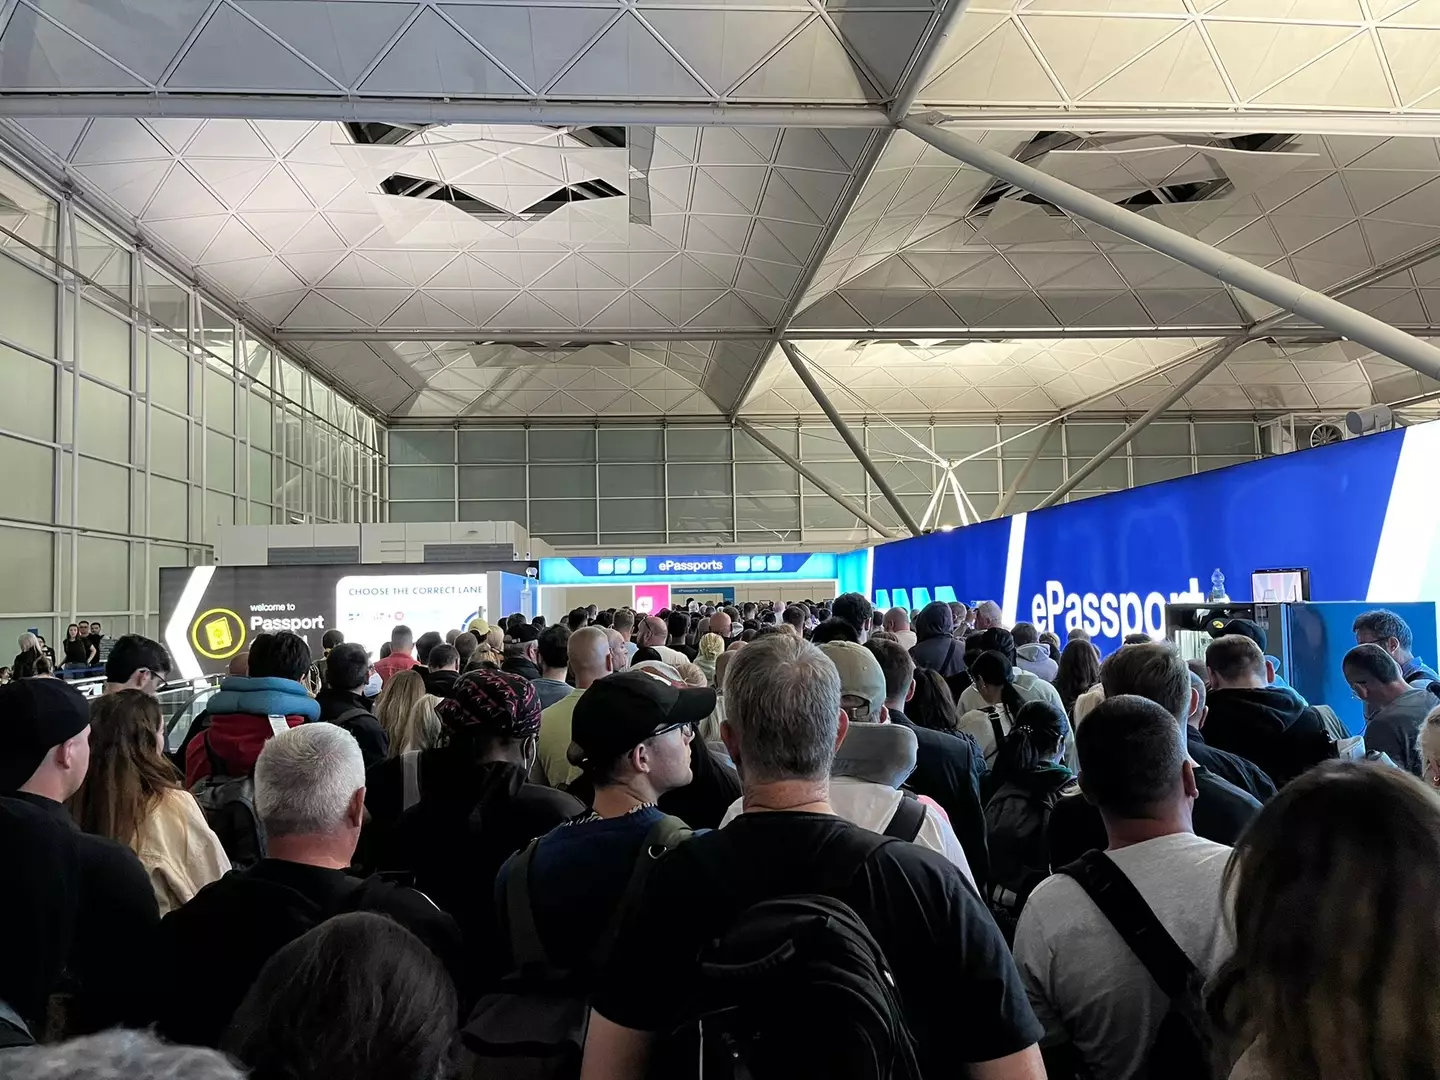 The anonymous baggage handler has described the chaos as 'mentally and physically' tiring.